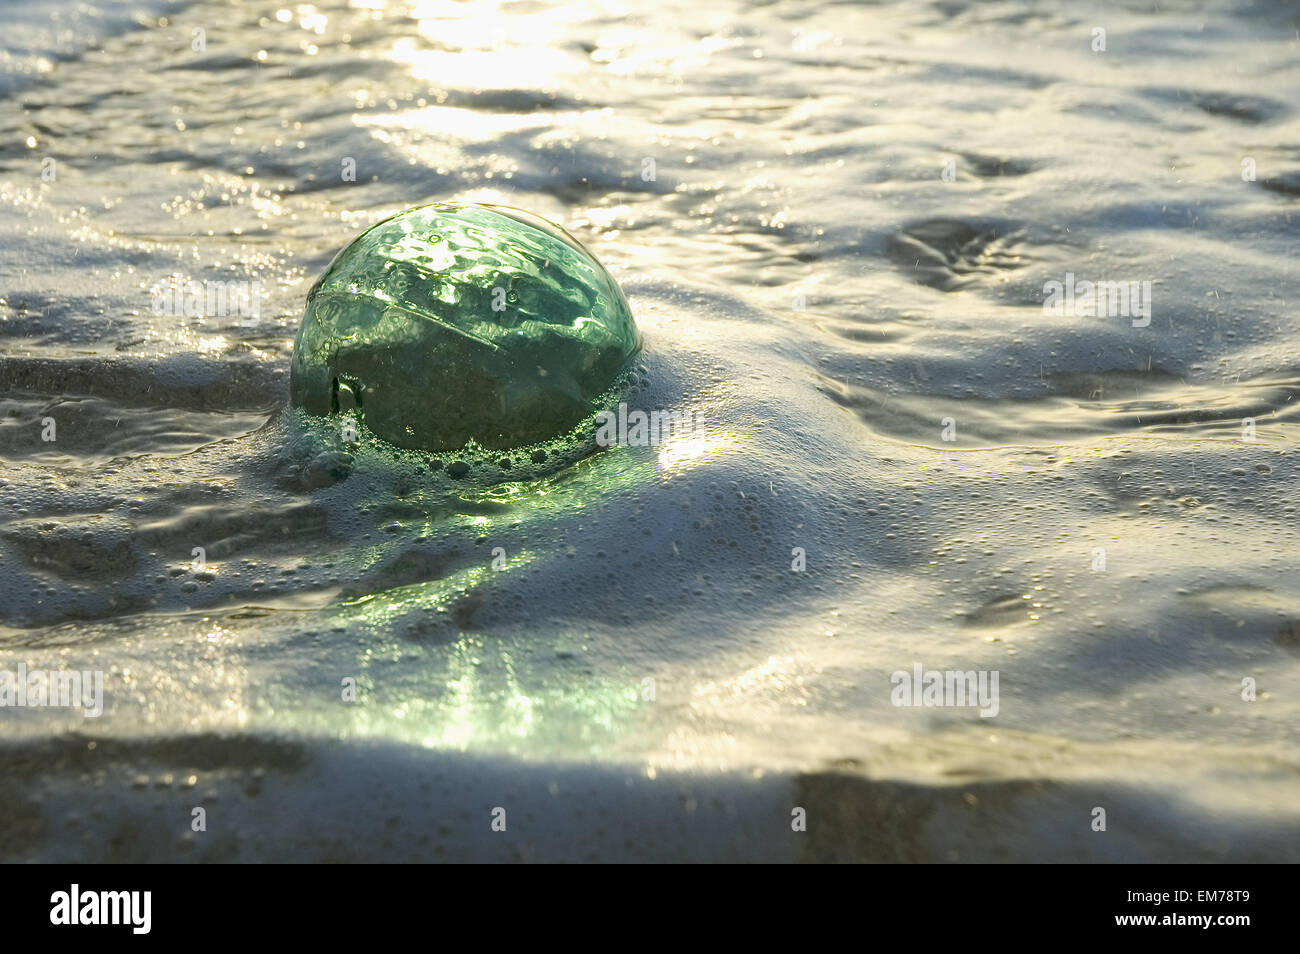 https://c8.alamy.com/comp/EM78T9/a-glass-fishing-ball-floats-in-shallow-water-bright-reflections-EM78T9.jpg